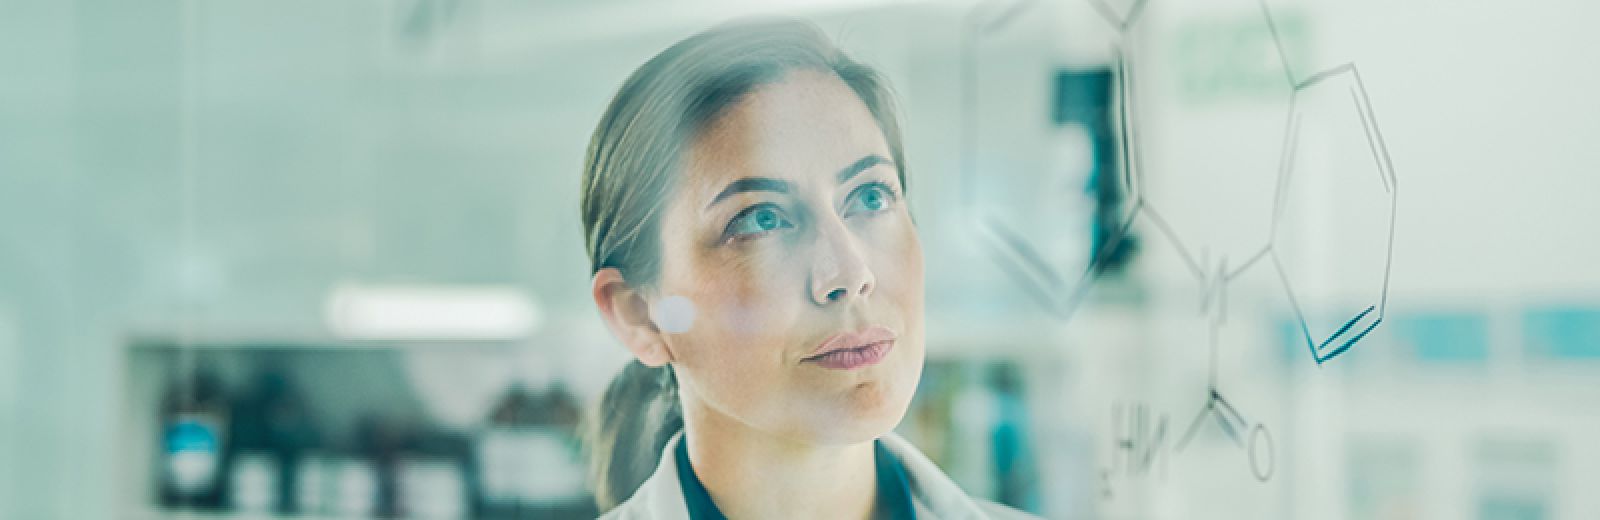 Female scientist using a digital tablet while looking at the Carbamazepine molecule writing on a glass screen in a laboratory, thinking whether to redesign the drug.